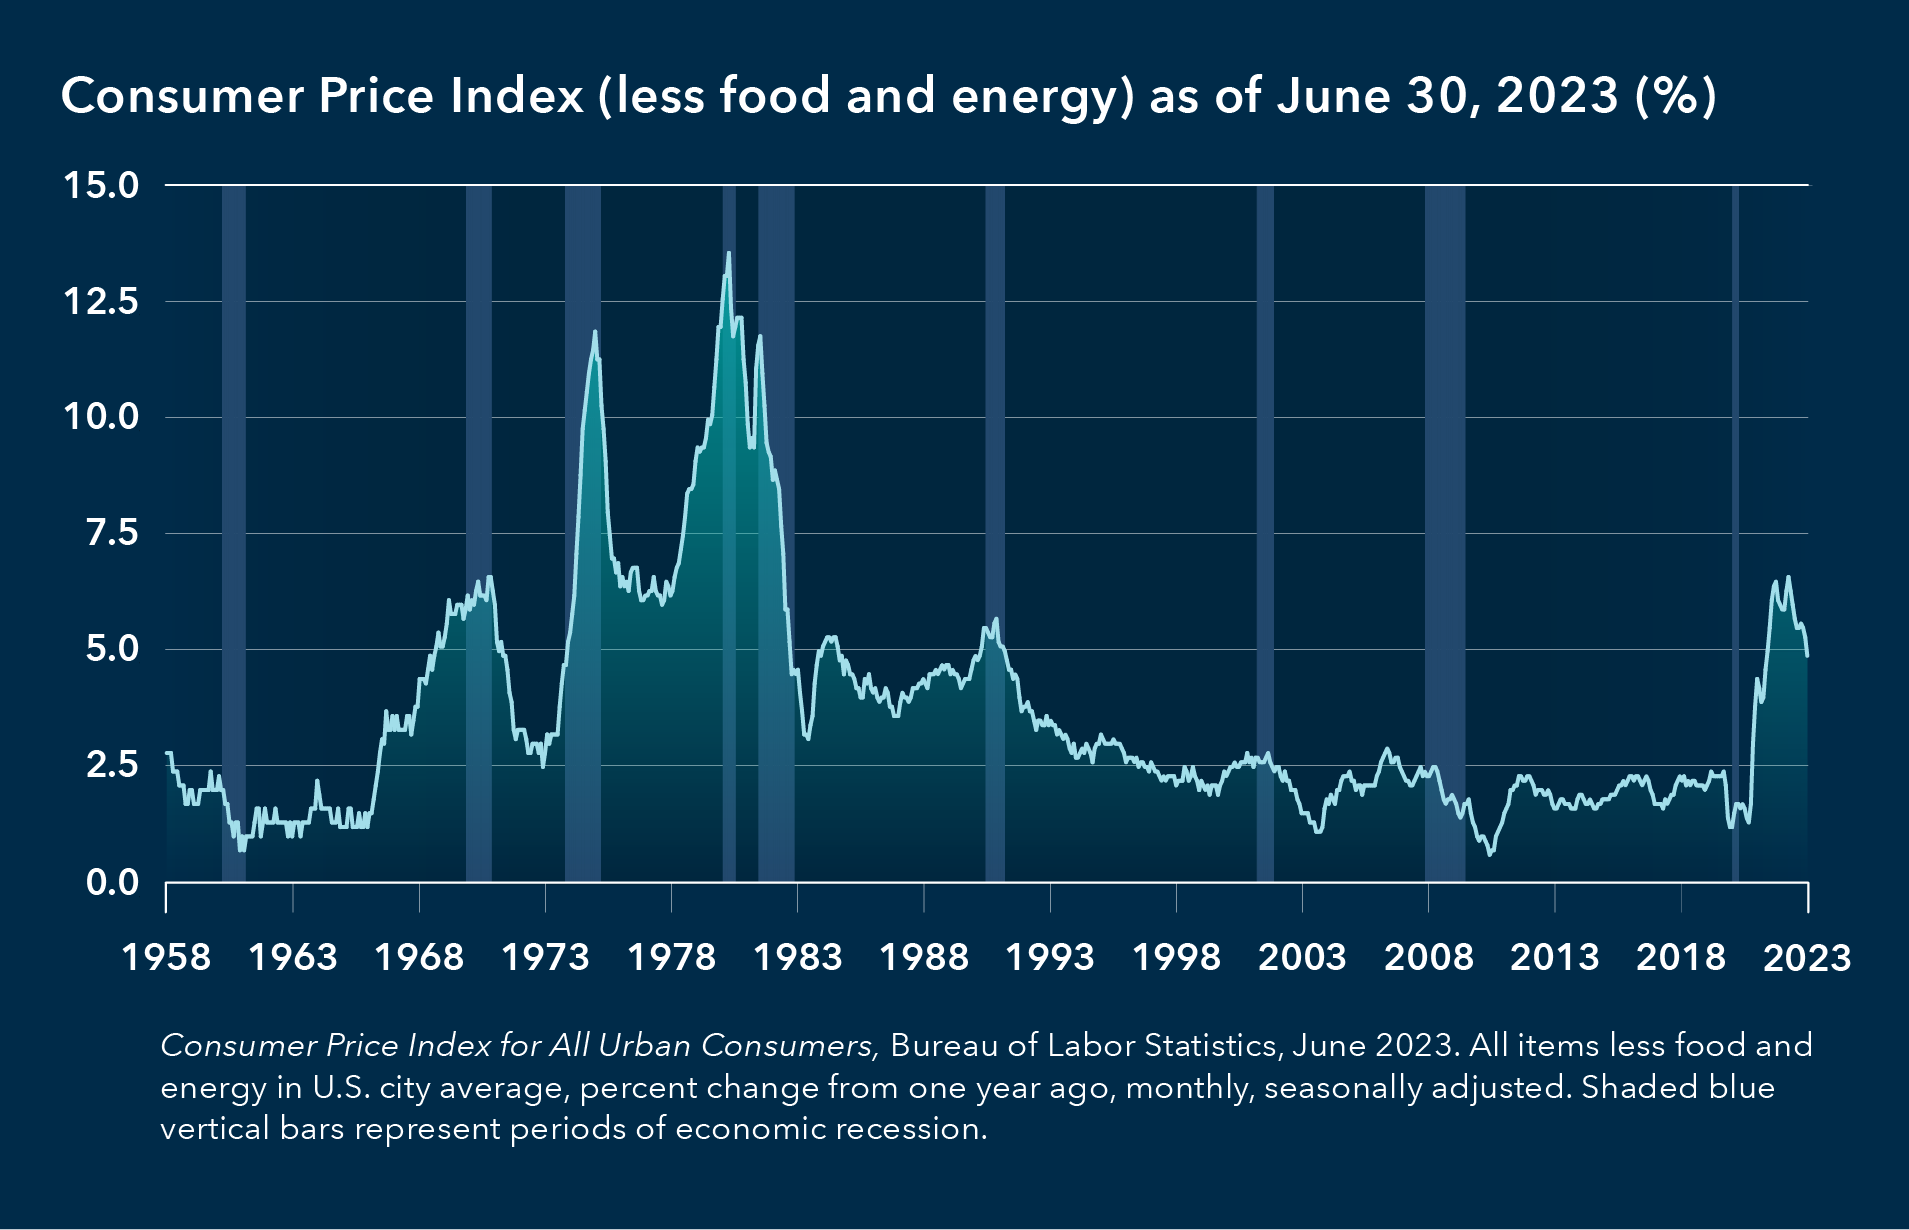 A line chart depicts the seasonally adjusted year-over-year percent change in the Consumer Price Index for All Urban Consumers, including all items less food and energy in U.S. city average on a monthly basis from the data series’ inception in January 1958 through June 2023. Periods of economic recession are indicated on chart via dark blue vertical shading corresponding to the periods of April 1961 through February 1961, December 1969 through November 1970, November 1973 through March 1975, January 1980 through July 1980. July 1981 through November 1982, July 1990 through March 1991, March 2001 through November 2001, December 2007 through June 2009, and February 2020 through June 2020. From a starting point of 2.8% in January 1958, the year-over-year percent change initially declines through June 1966, before spiking to highs of 11.9% in February 1975 and 13.6% in June 1980. From there, the inflation rate broadly declines through early 2021 and then rapidly increases through the remainder of the year and much of 2022, ending at 4.9% in June 2023. 